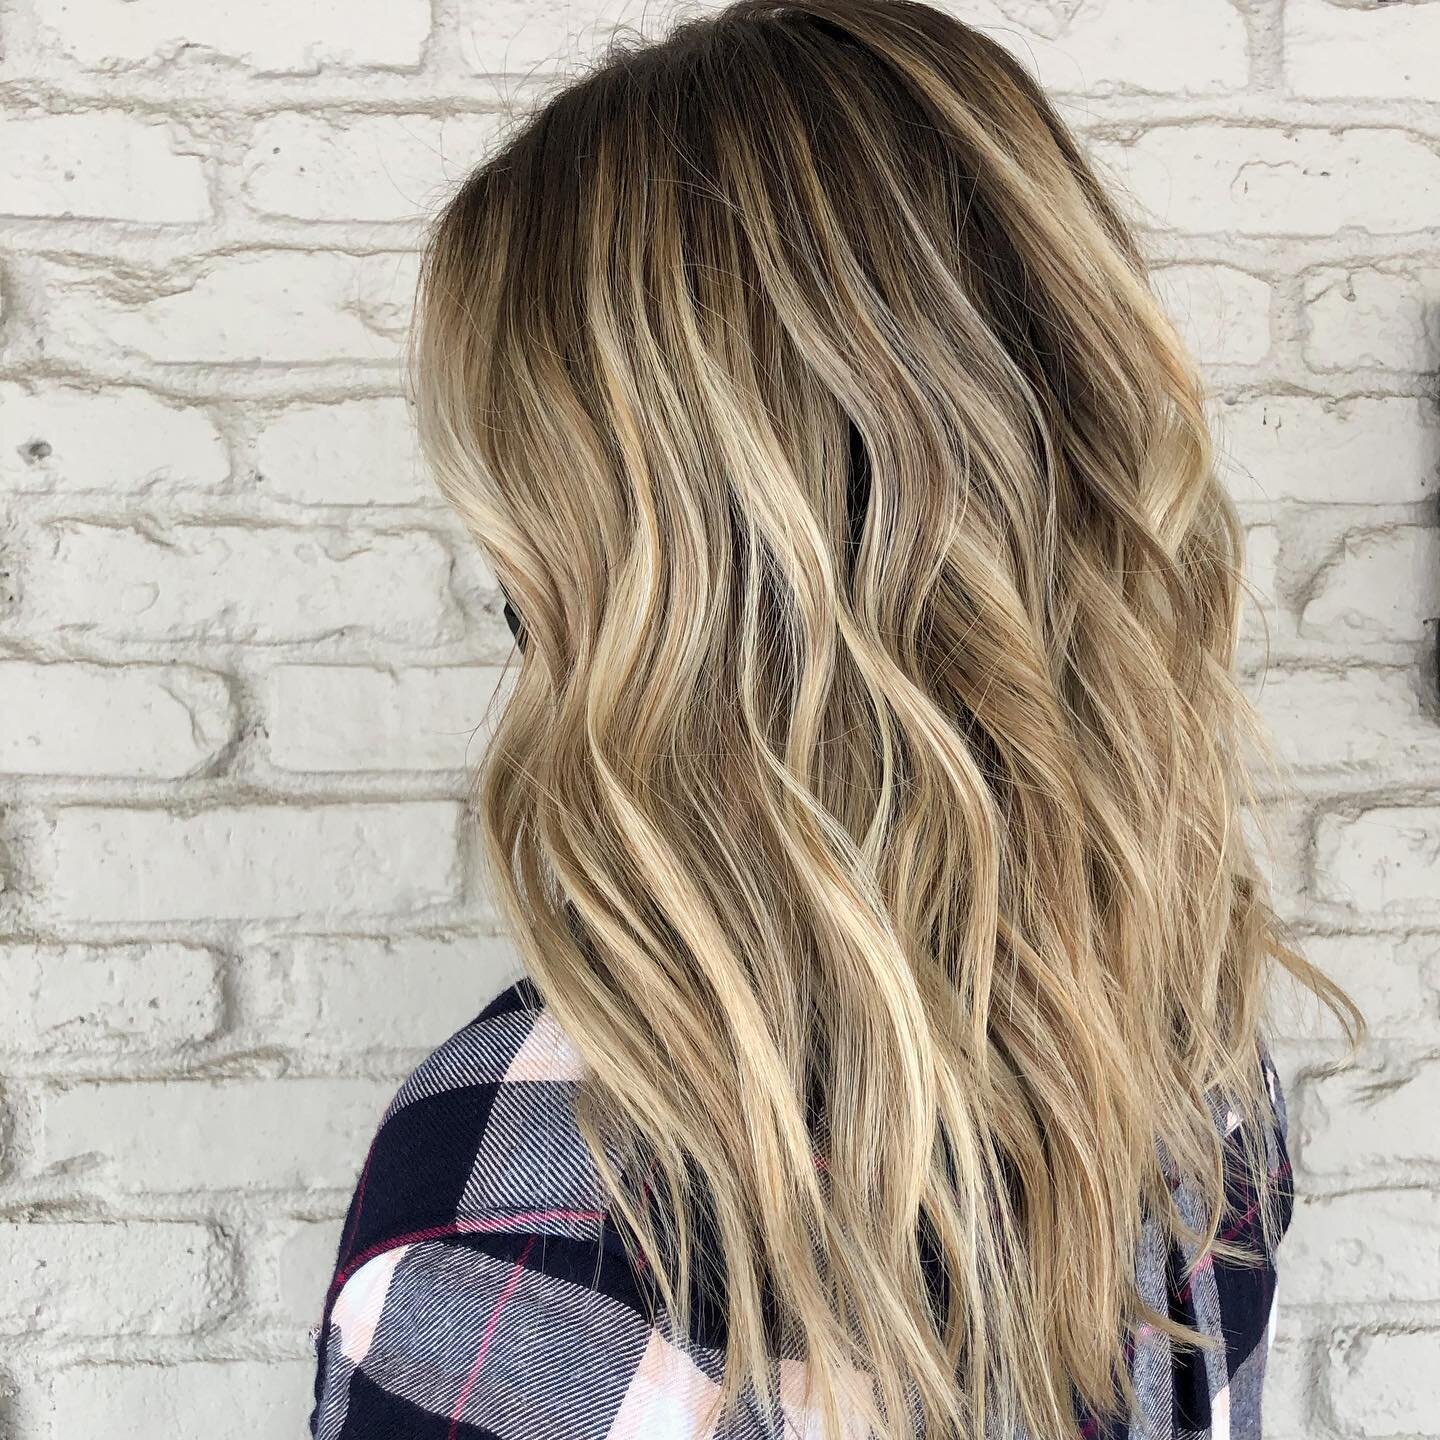 OBSESSED is an understatement &hearts;️
Beautiful work done by @kacie_lavishwayzata 
Also I&rsquo;m just in love with the way she curls and styles hair. She nails it every time!